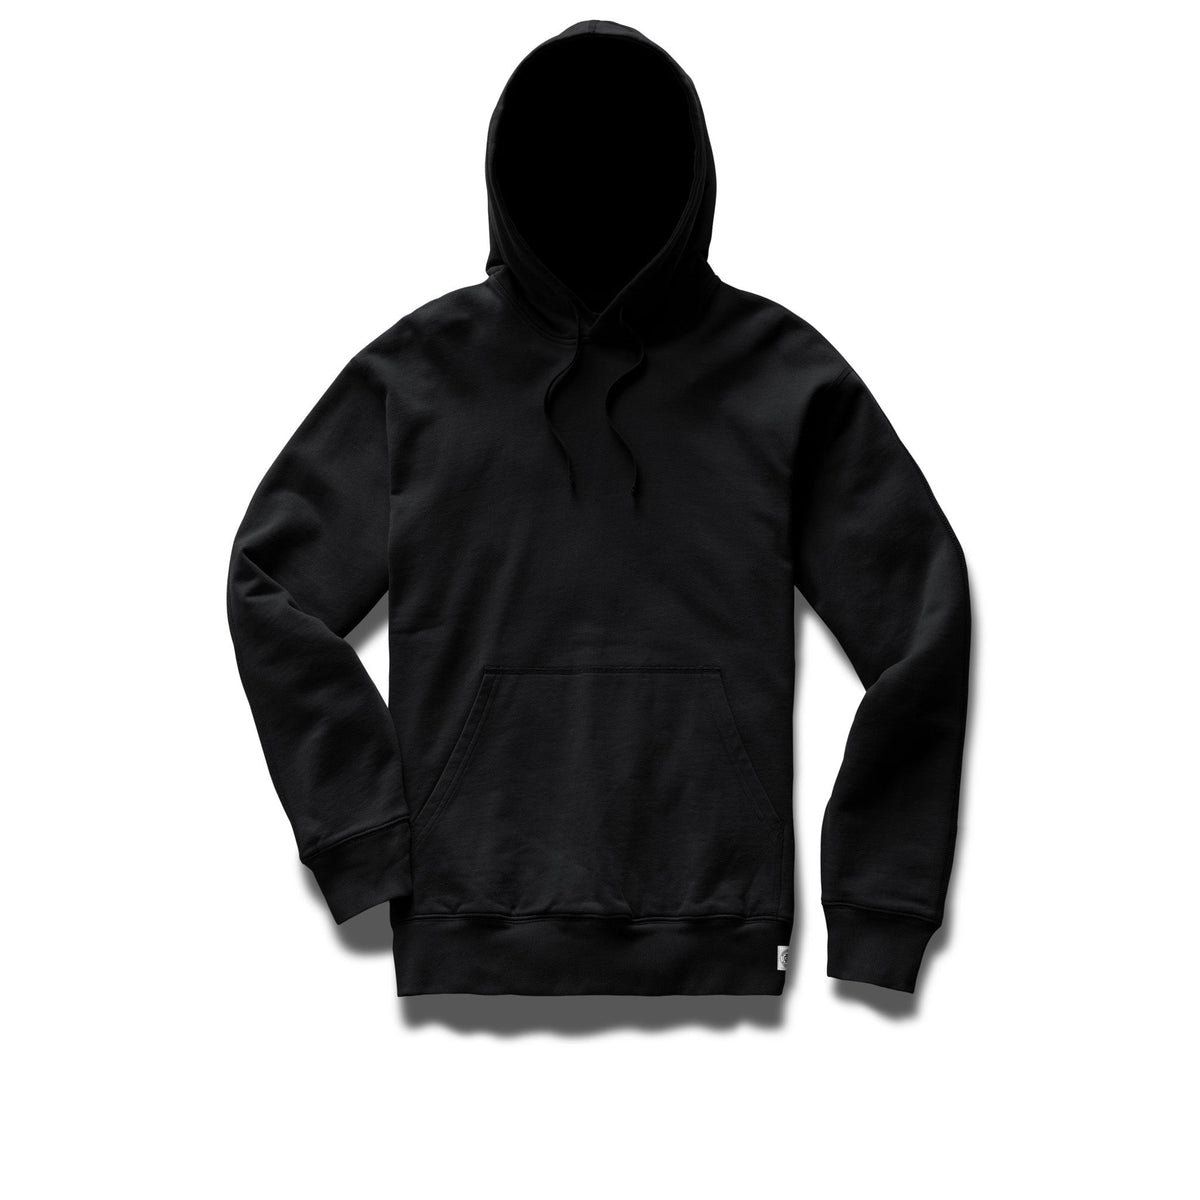 Reigning Champ Men Knit Lightweight Terry Classic Hoodie Black RC-3731-BLK - SWEATERS - Canada